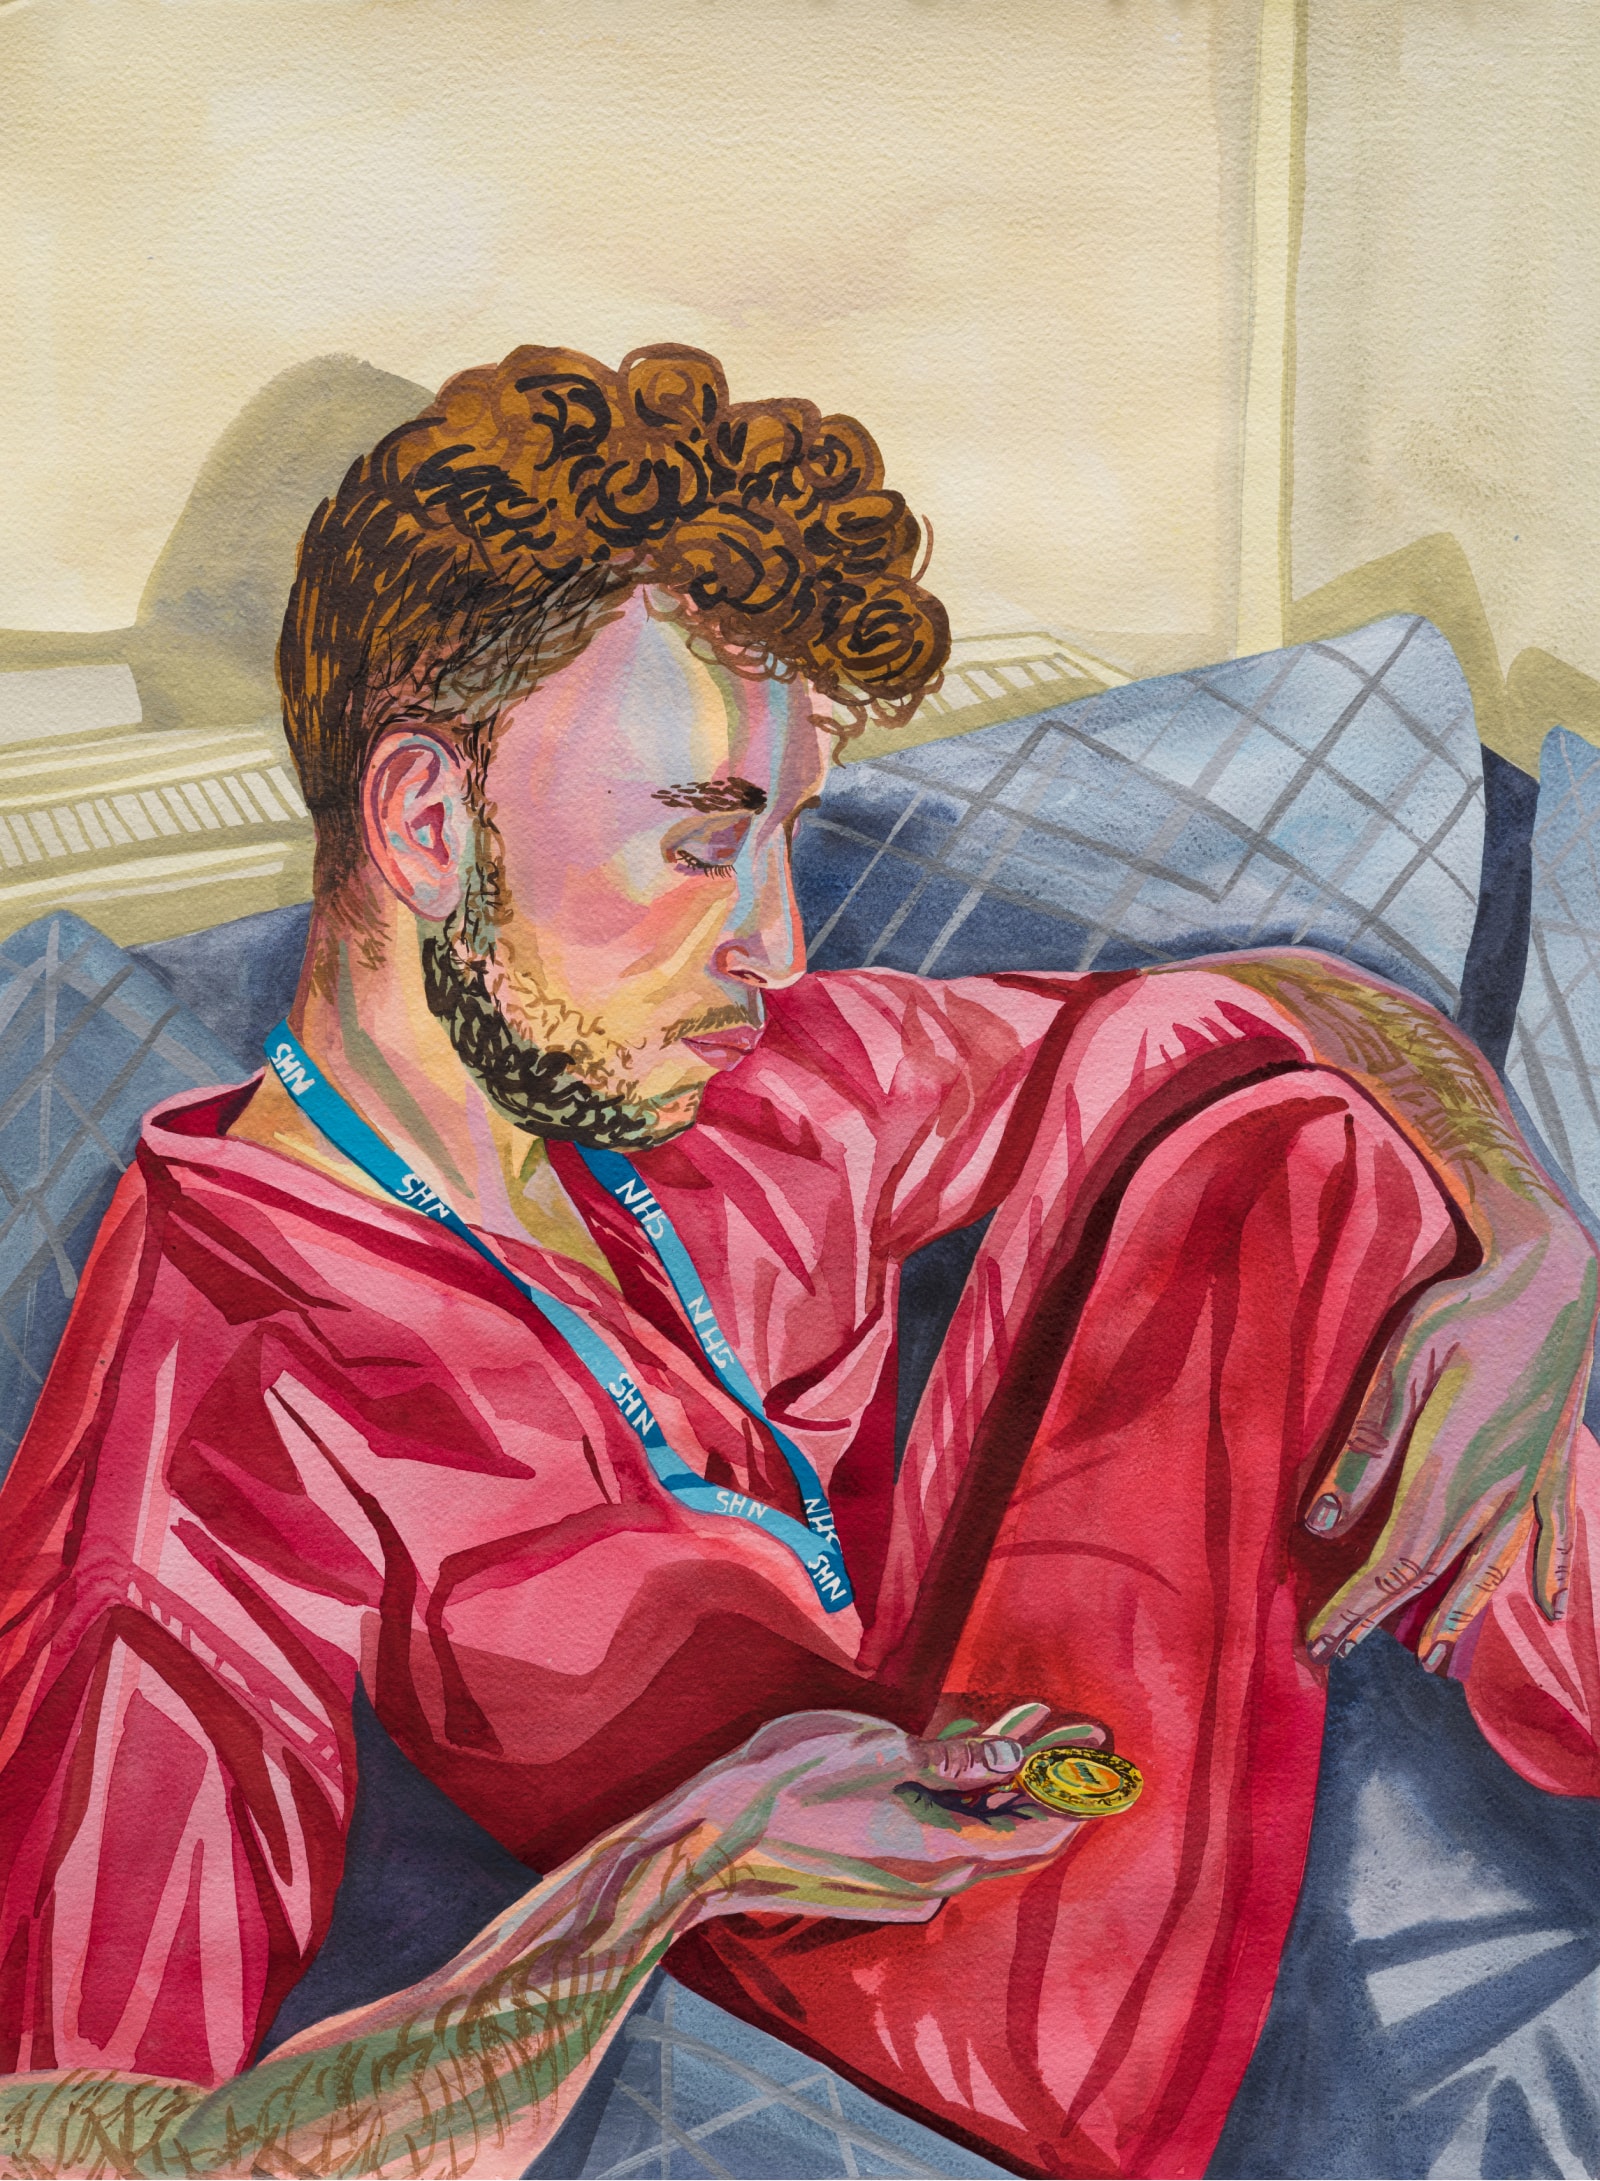 Nisenbaum’s “Alan” featuring a young man in red scrubs seated on a blue couch, looking at a gold metal